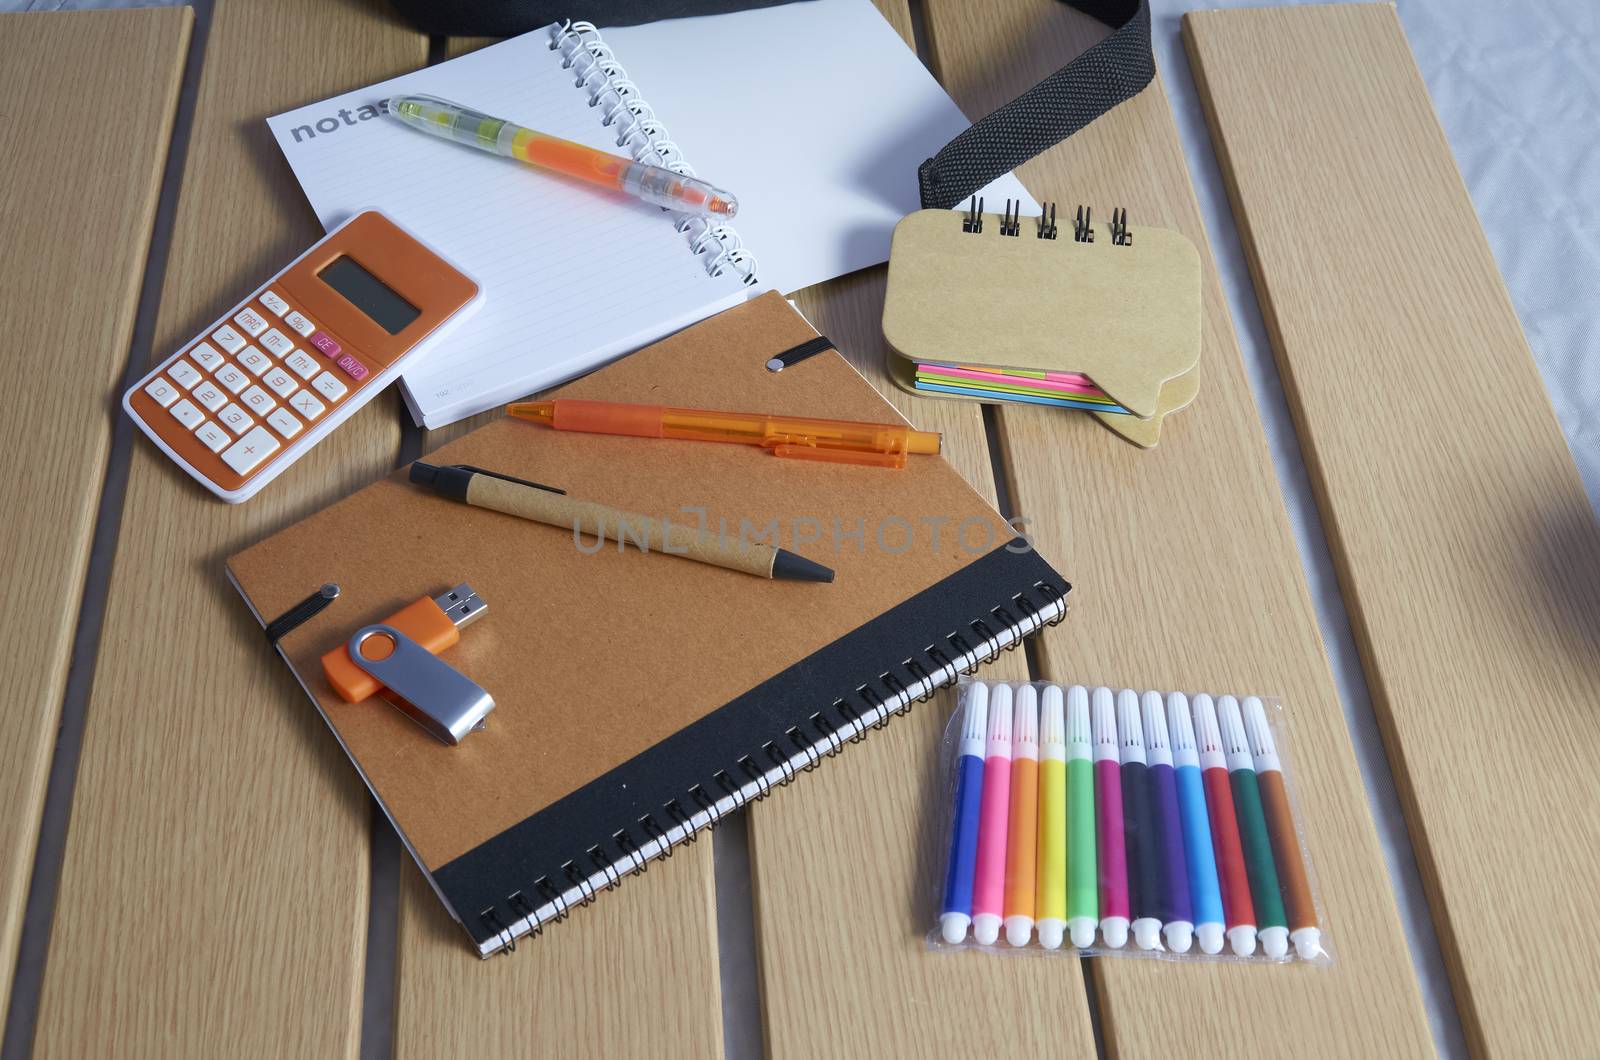 Back to school, notebooks, pens and markers by bpardofotografia